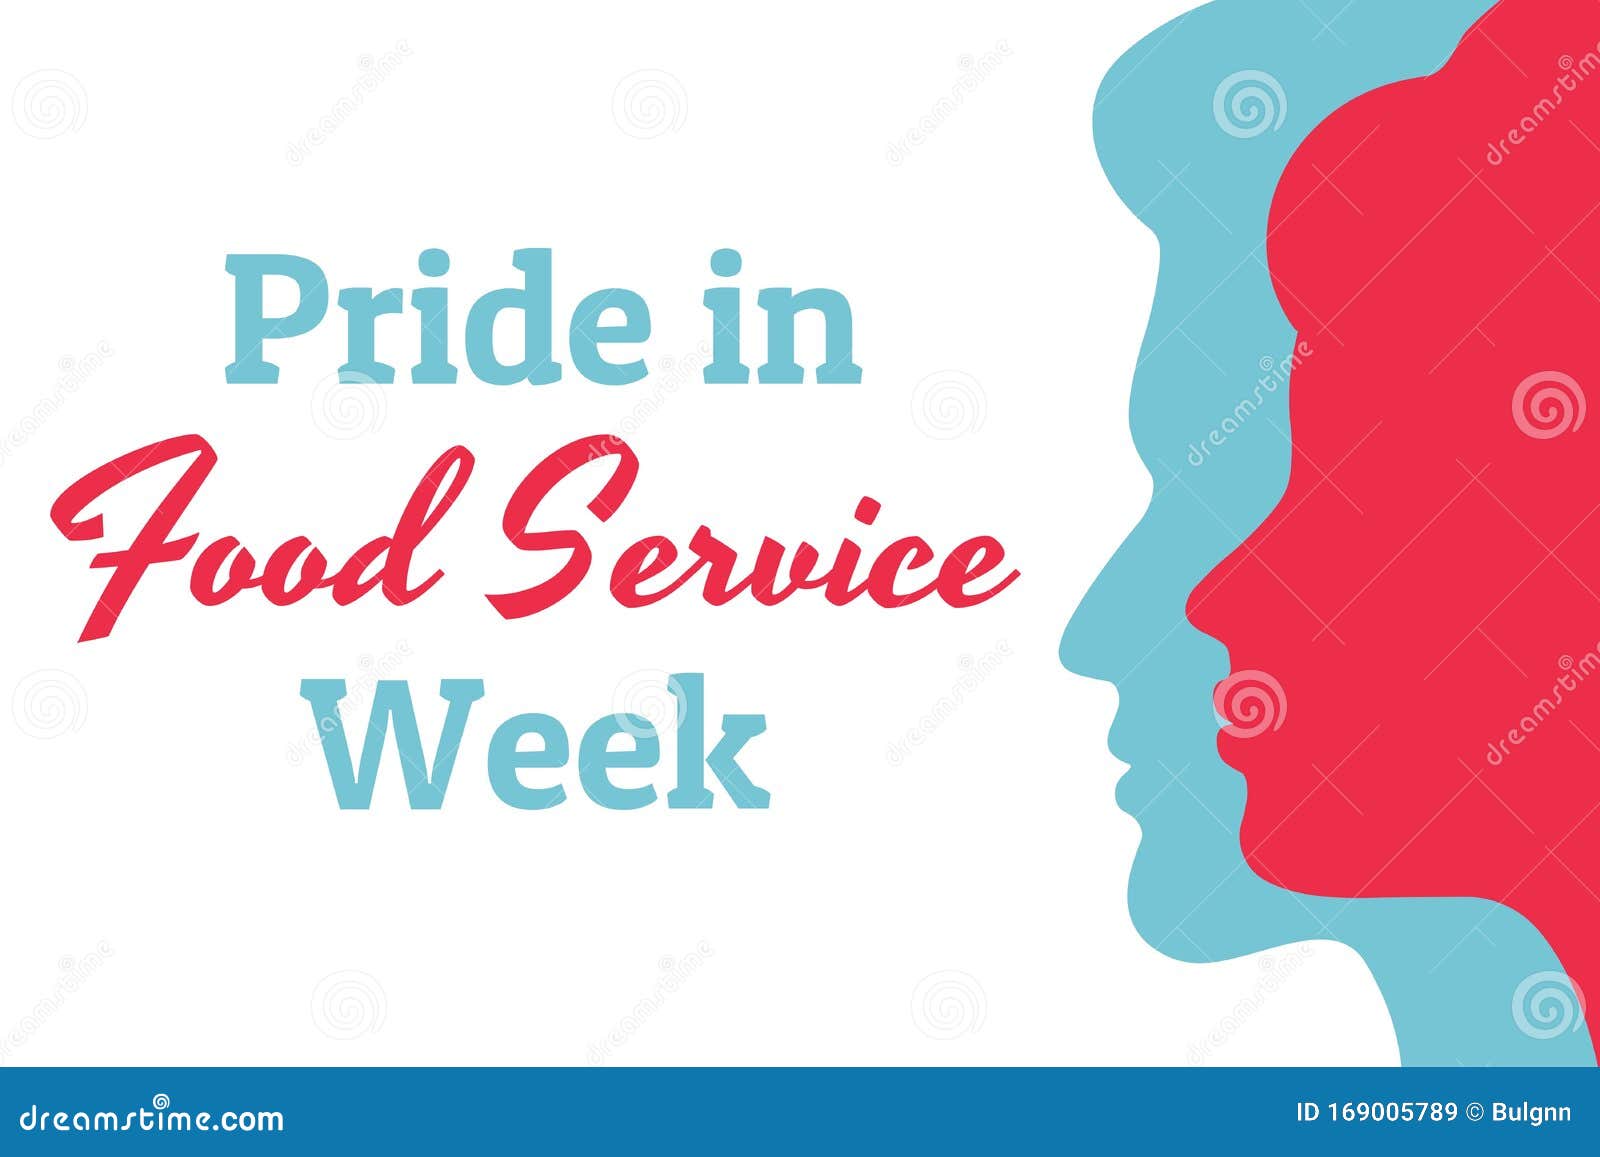 Pride in Food Service Week Concept Banner with Female and Male